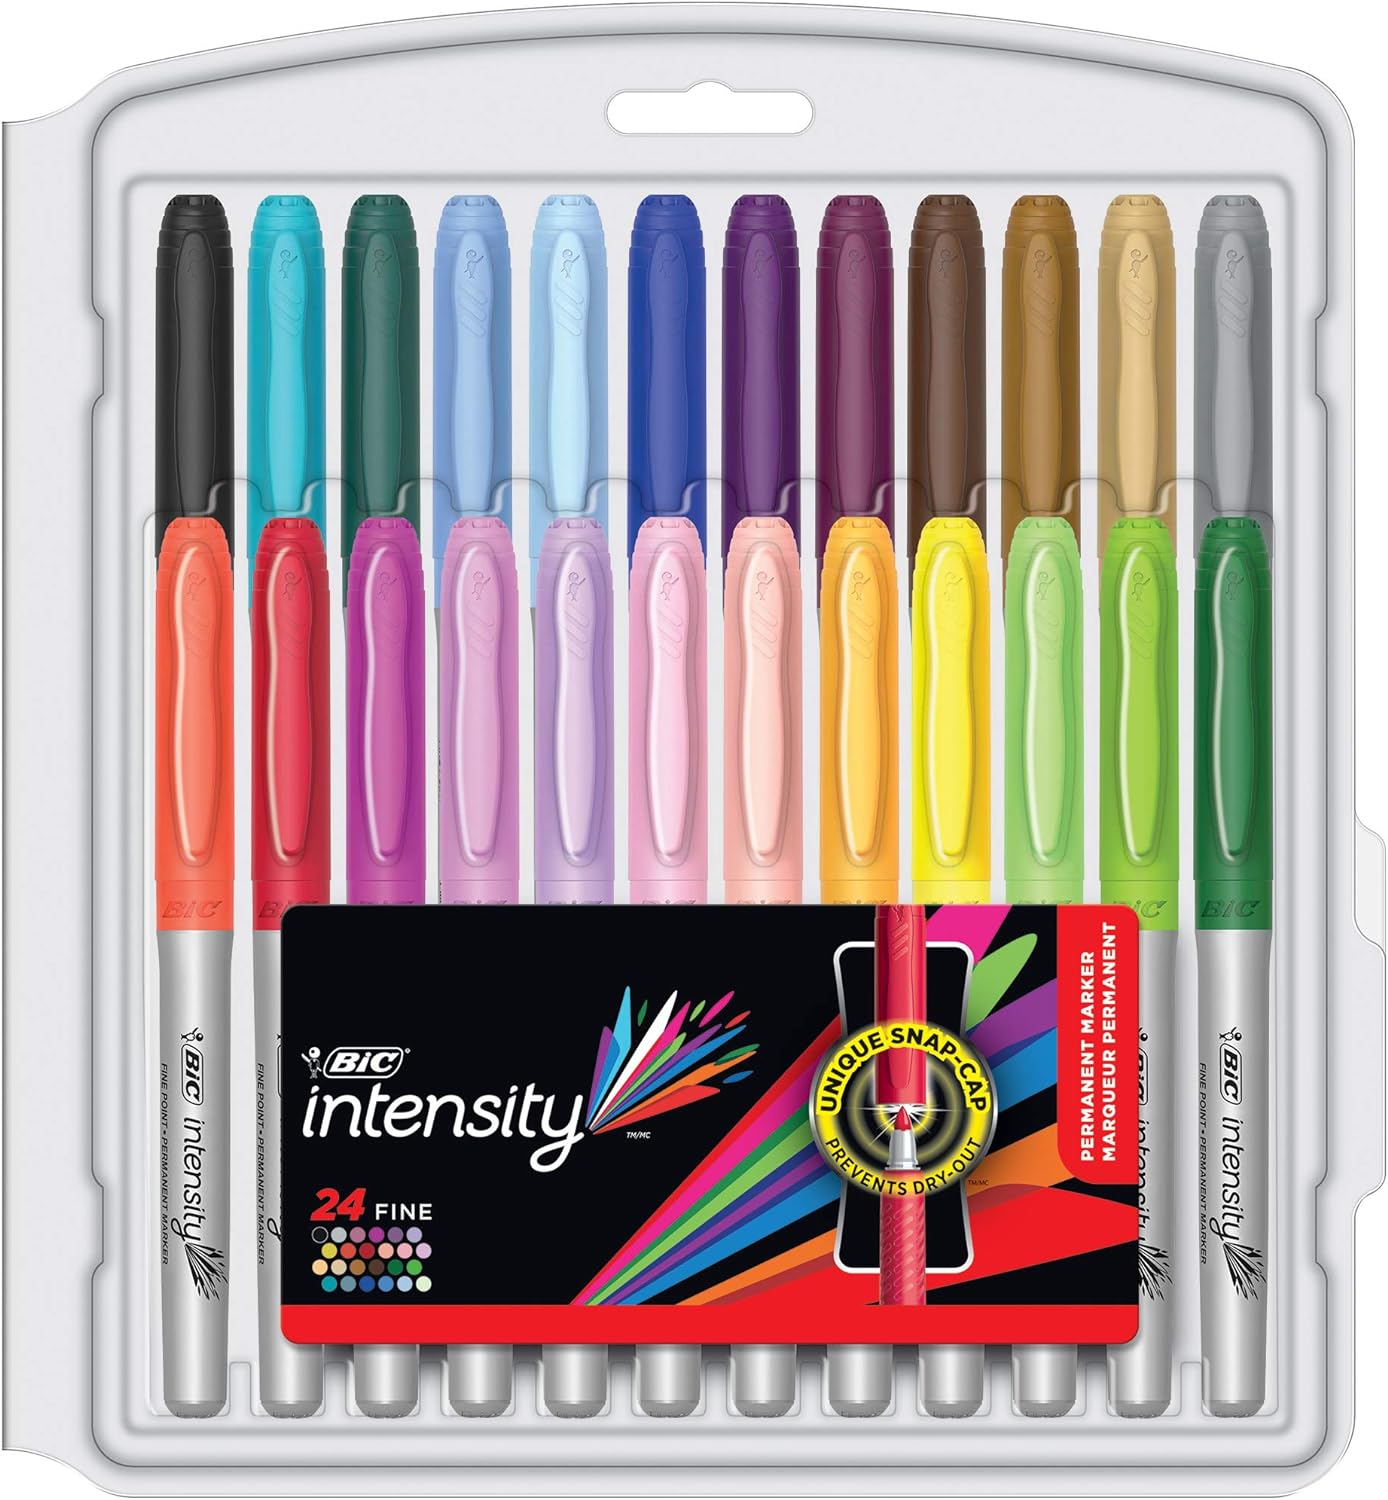 BIC Intensity Fashion Permanent Markers, Fine Point, Assorted Colors, 24-Count (packaging may vary)